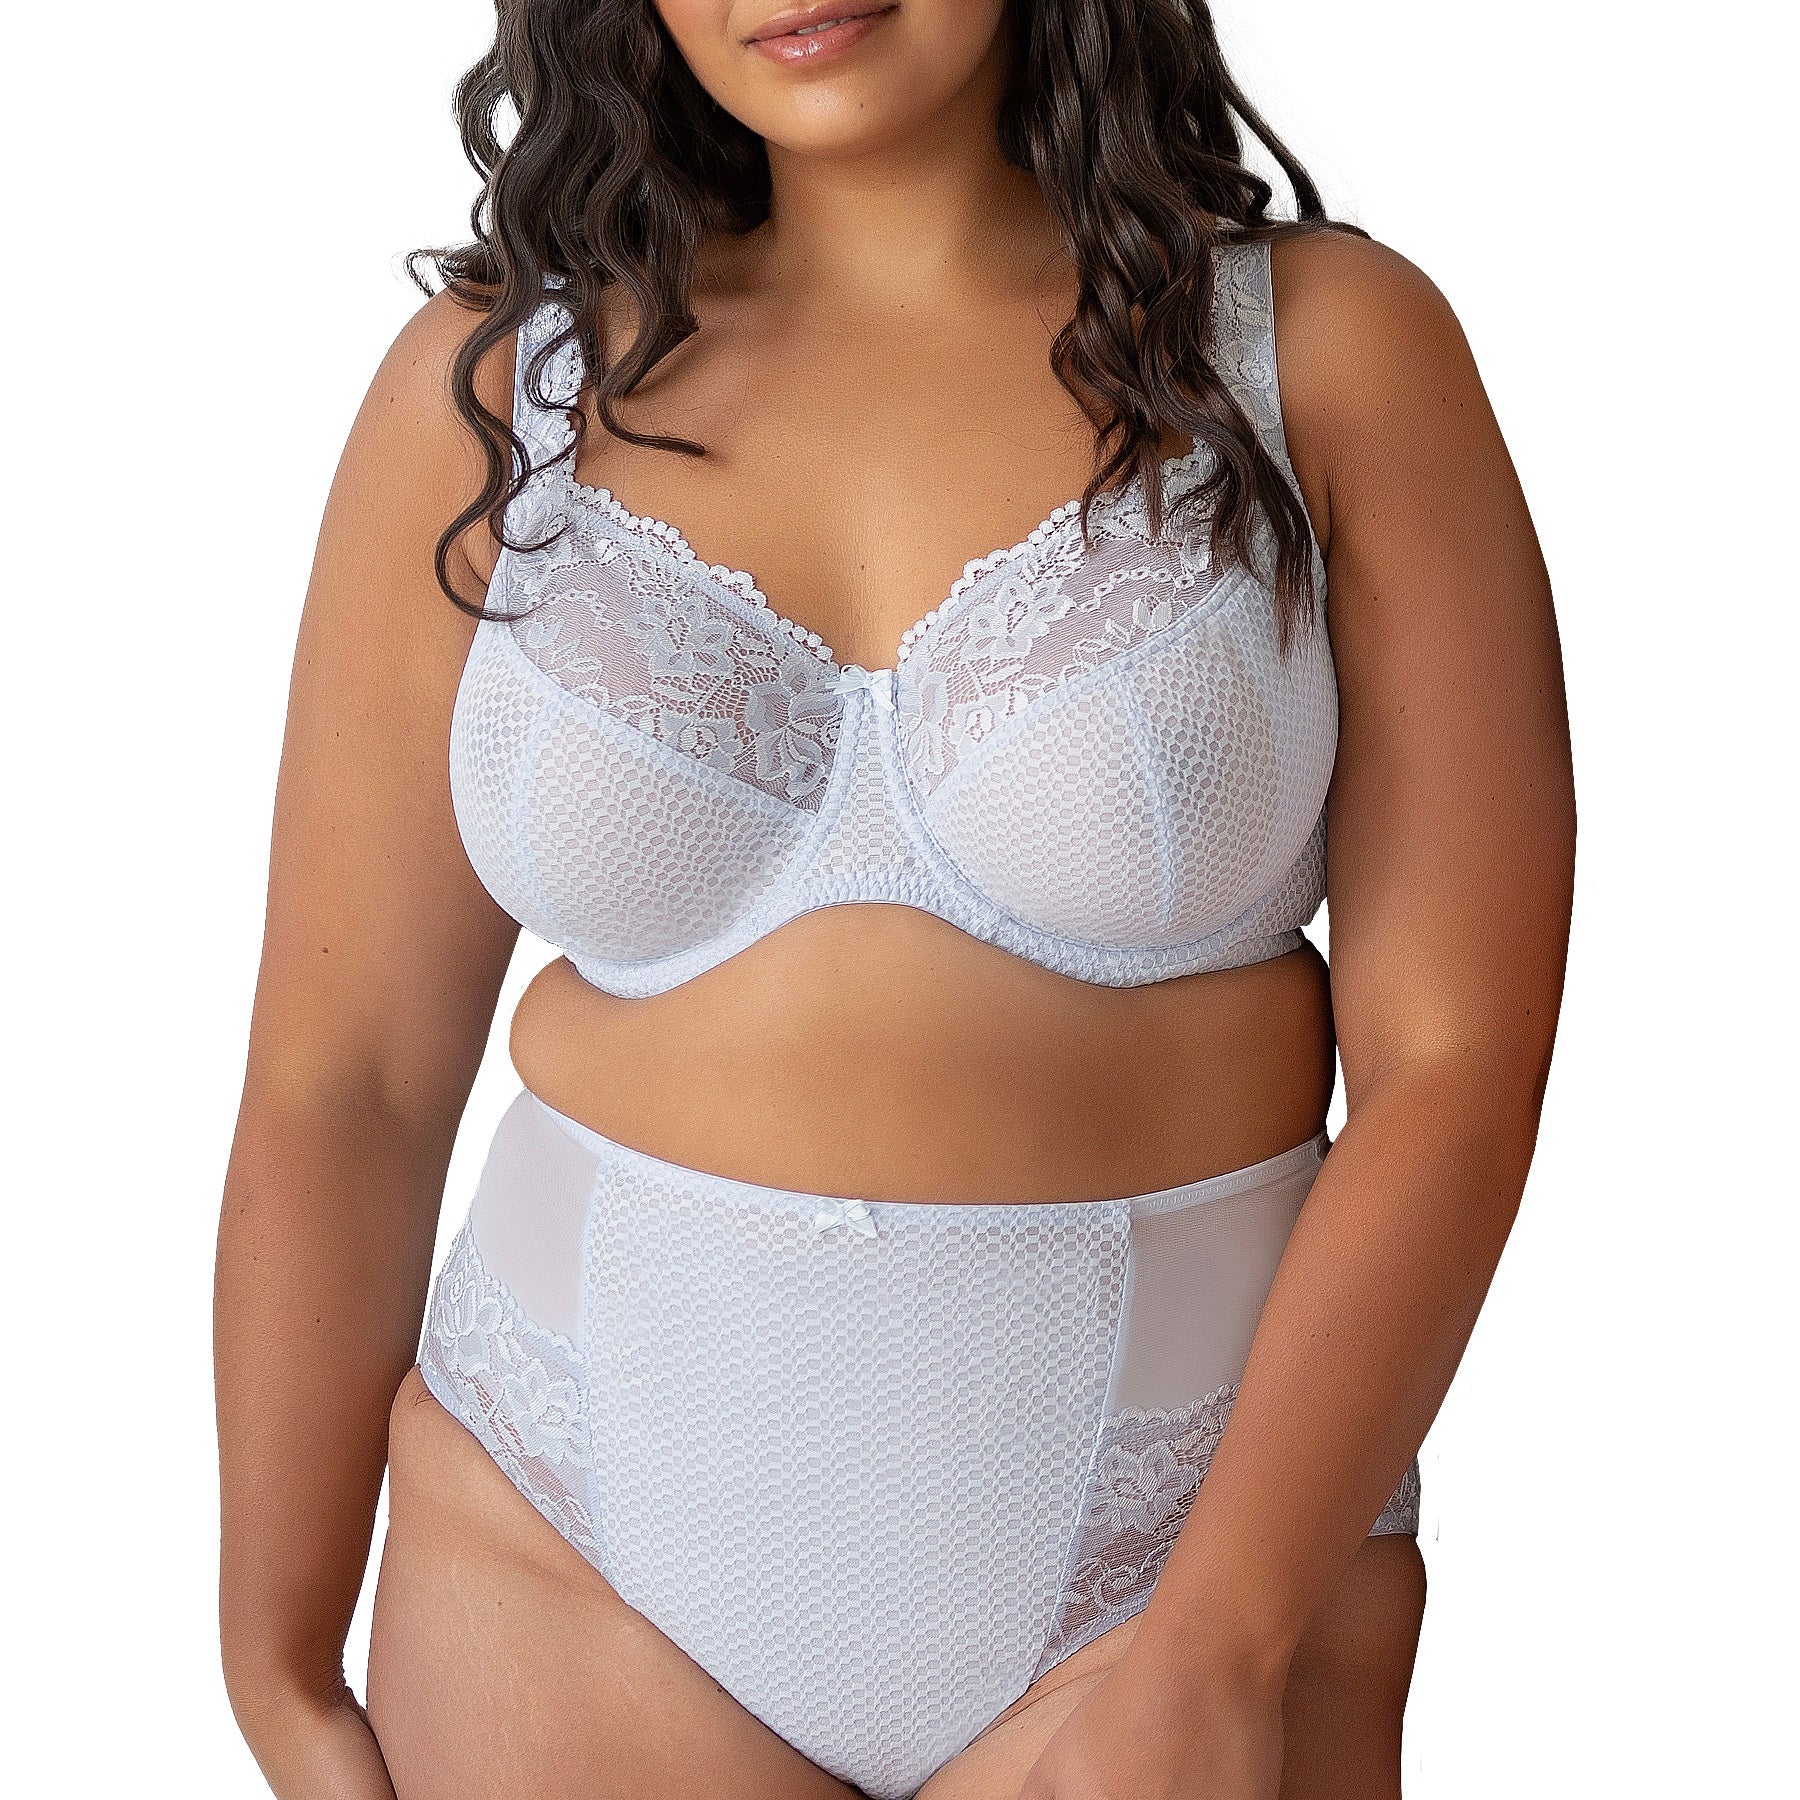 Fit Fully Yours Serena Lace Underwire Bra B2761 Steel Blue Set